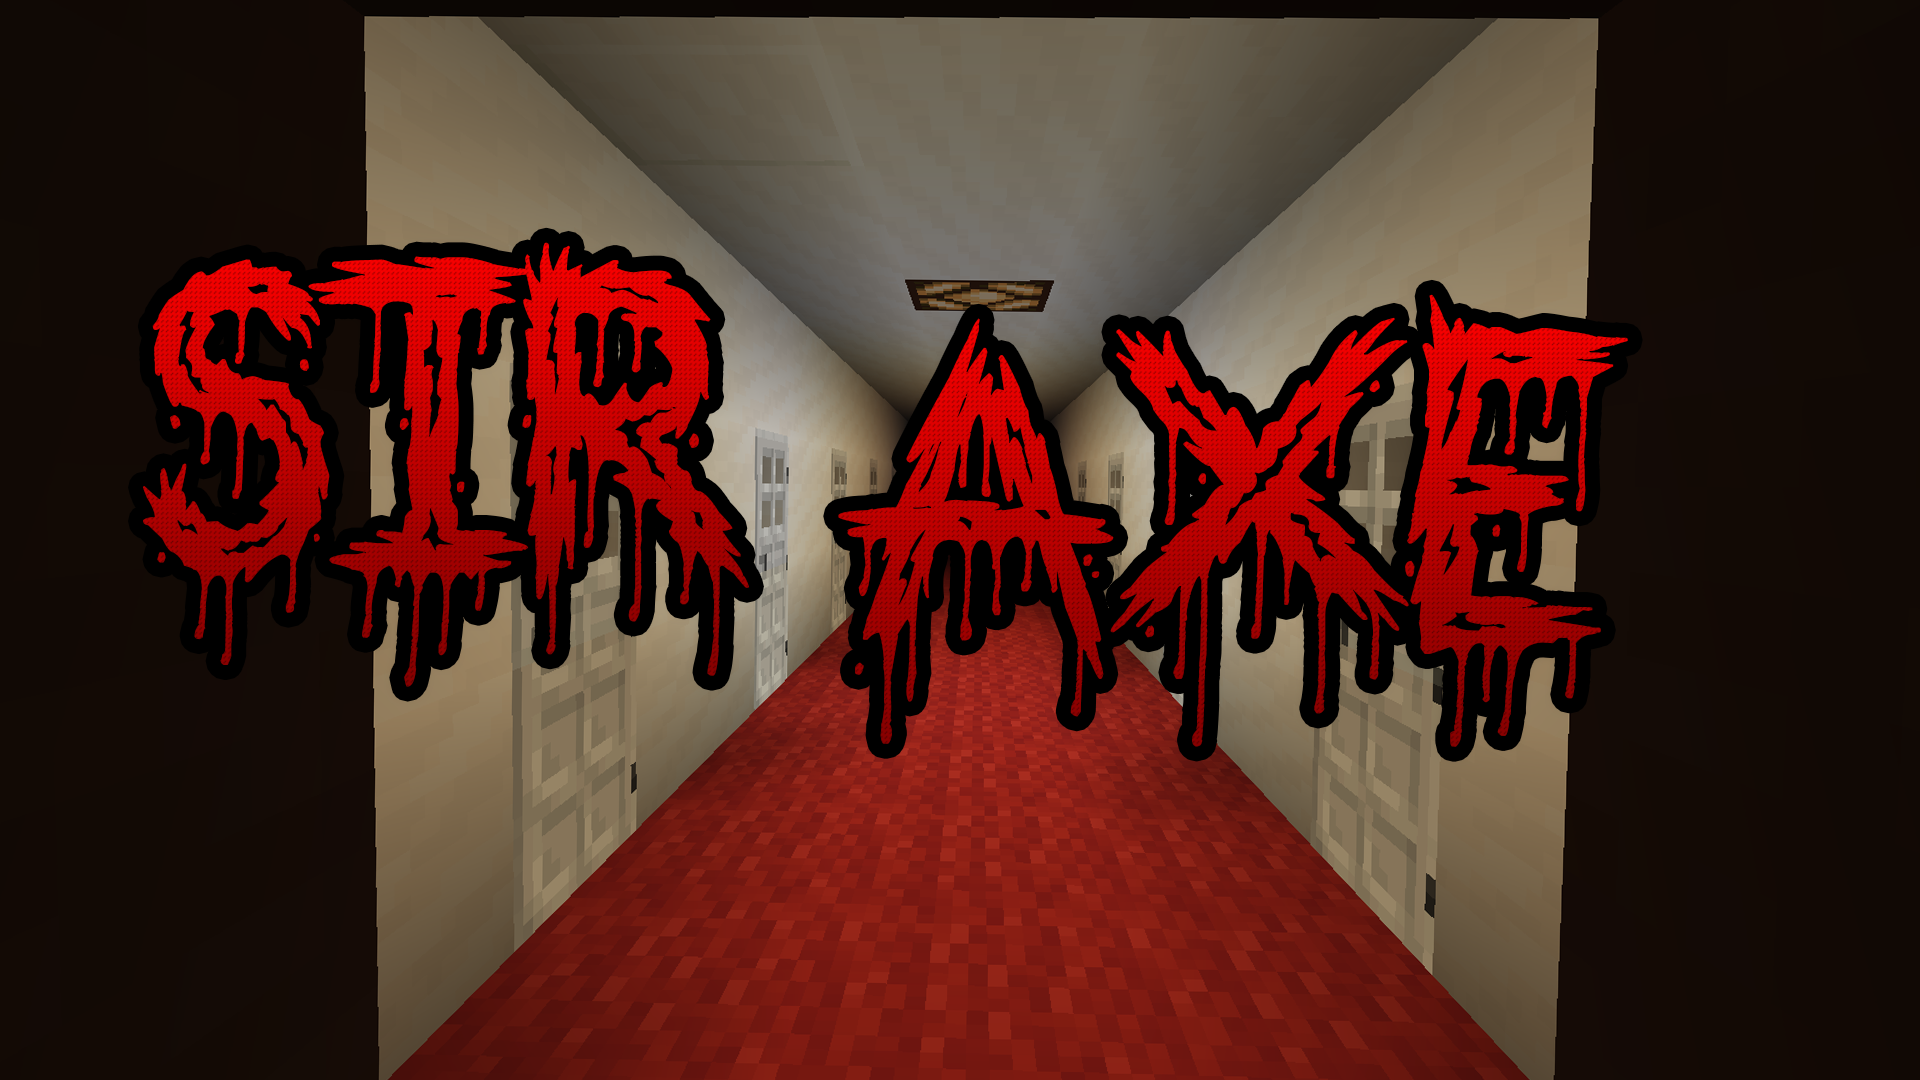 Download Sir Axe for Minecraft 1.14.4